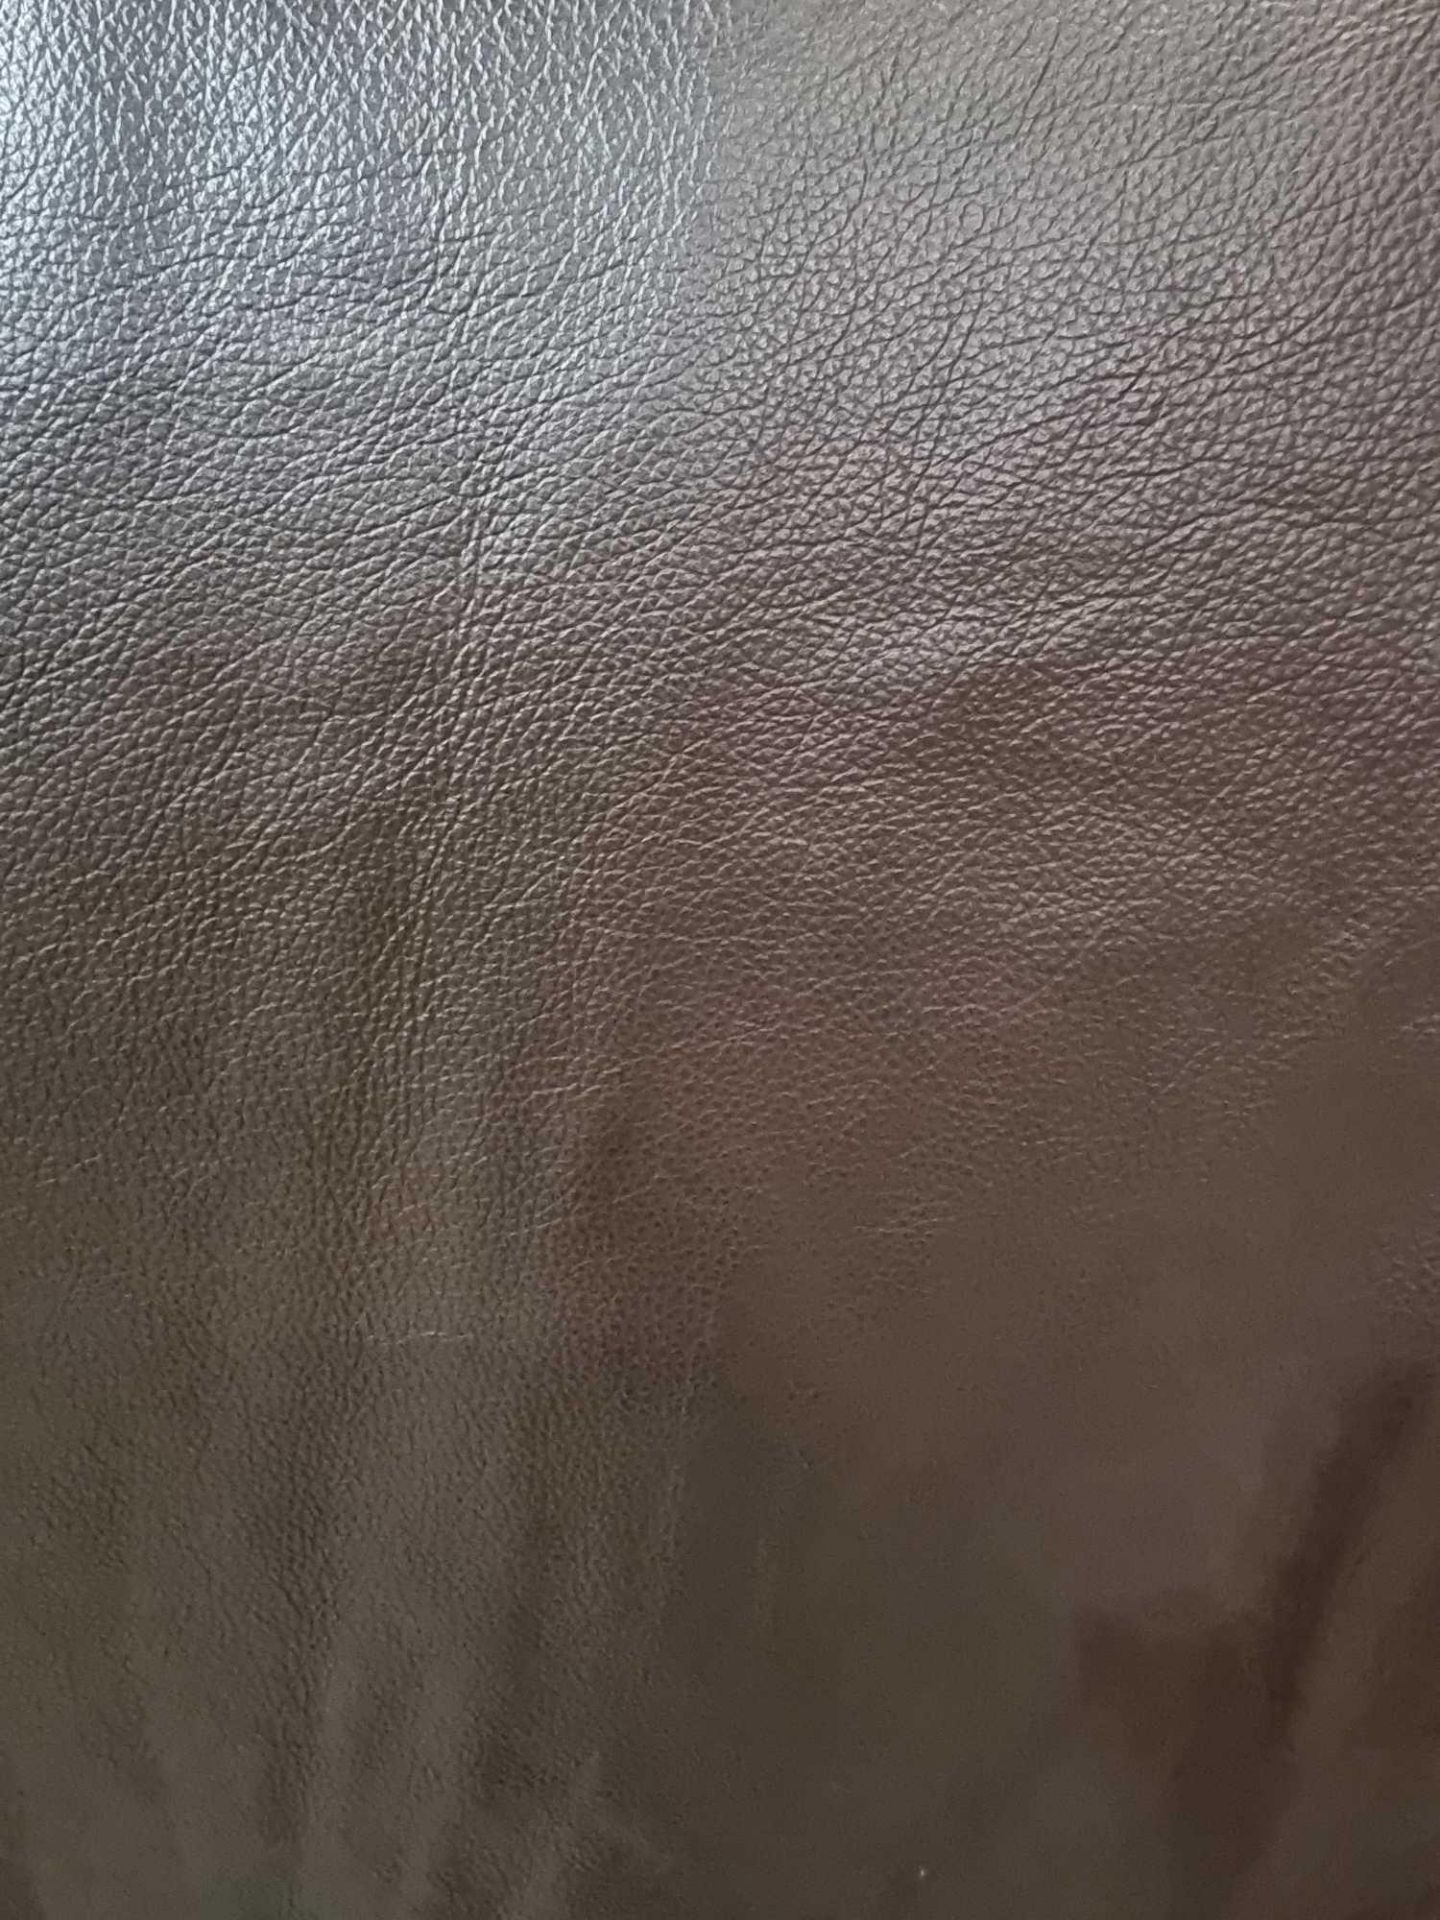 Mastrotto Hudson Chocolate Leather Hide approximately 4.56mÂ² 2.4 x 1.9cm